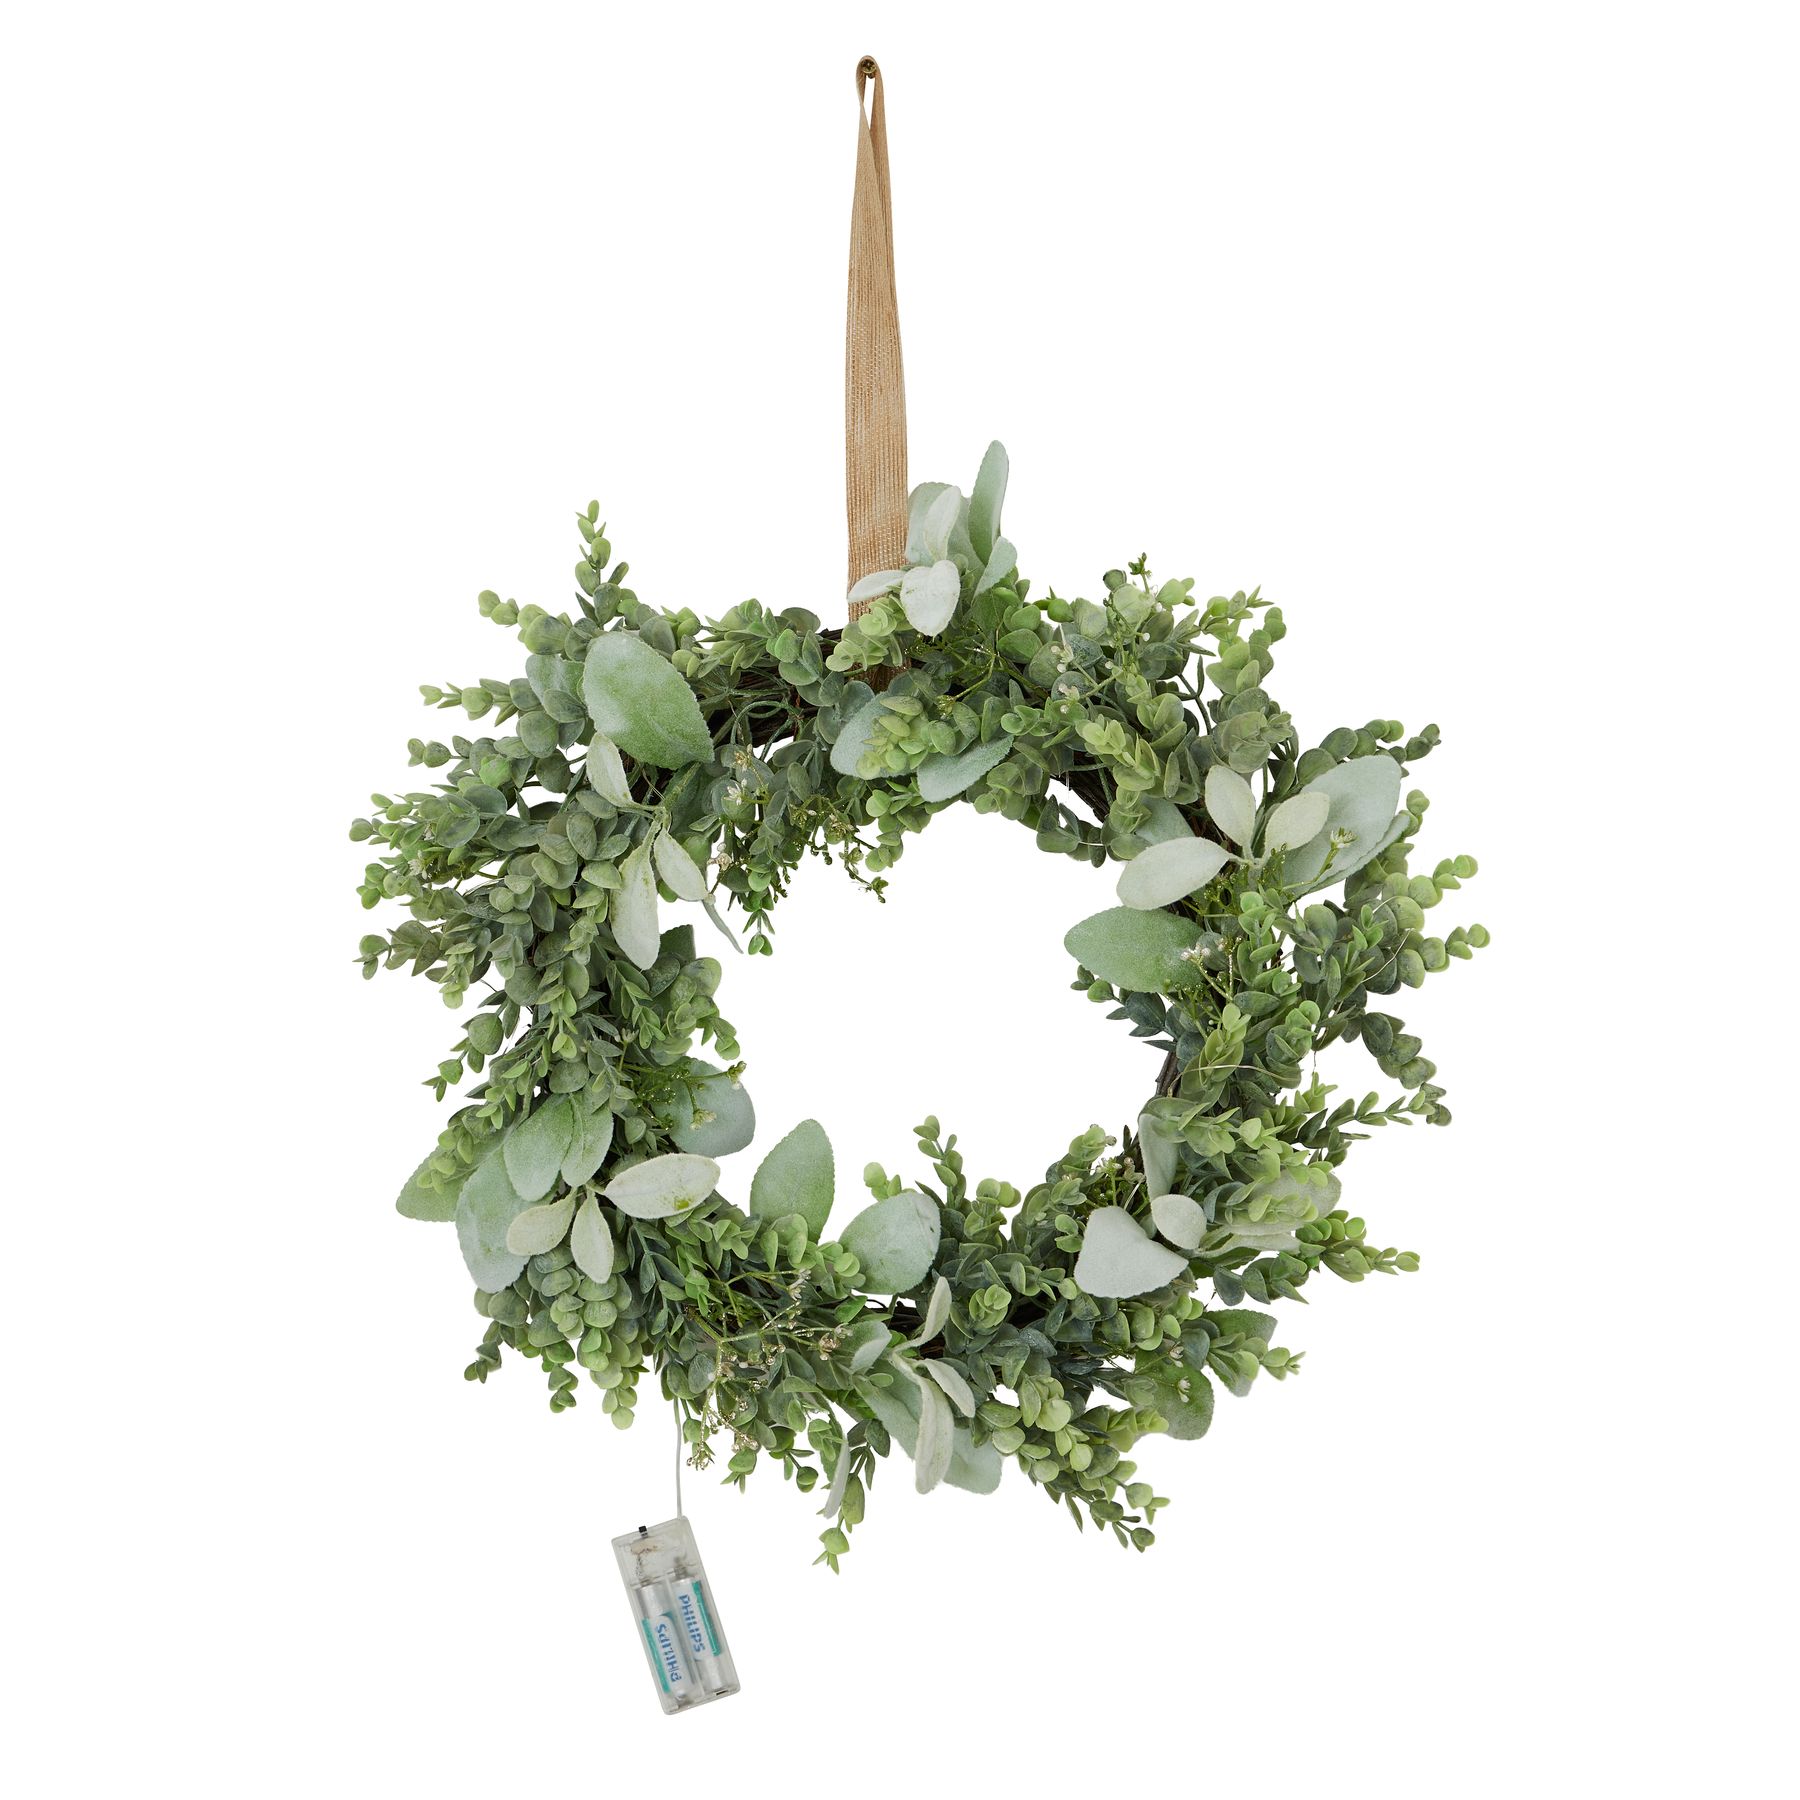 LED Winter Wreath With Eucalyptus And Lambs Ear - Image 2